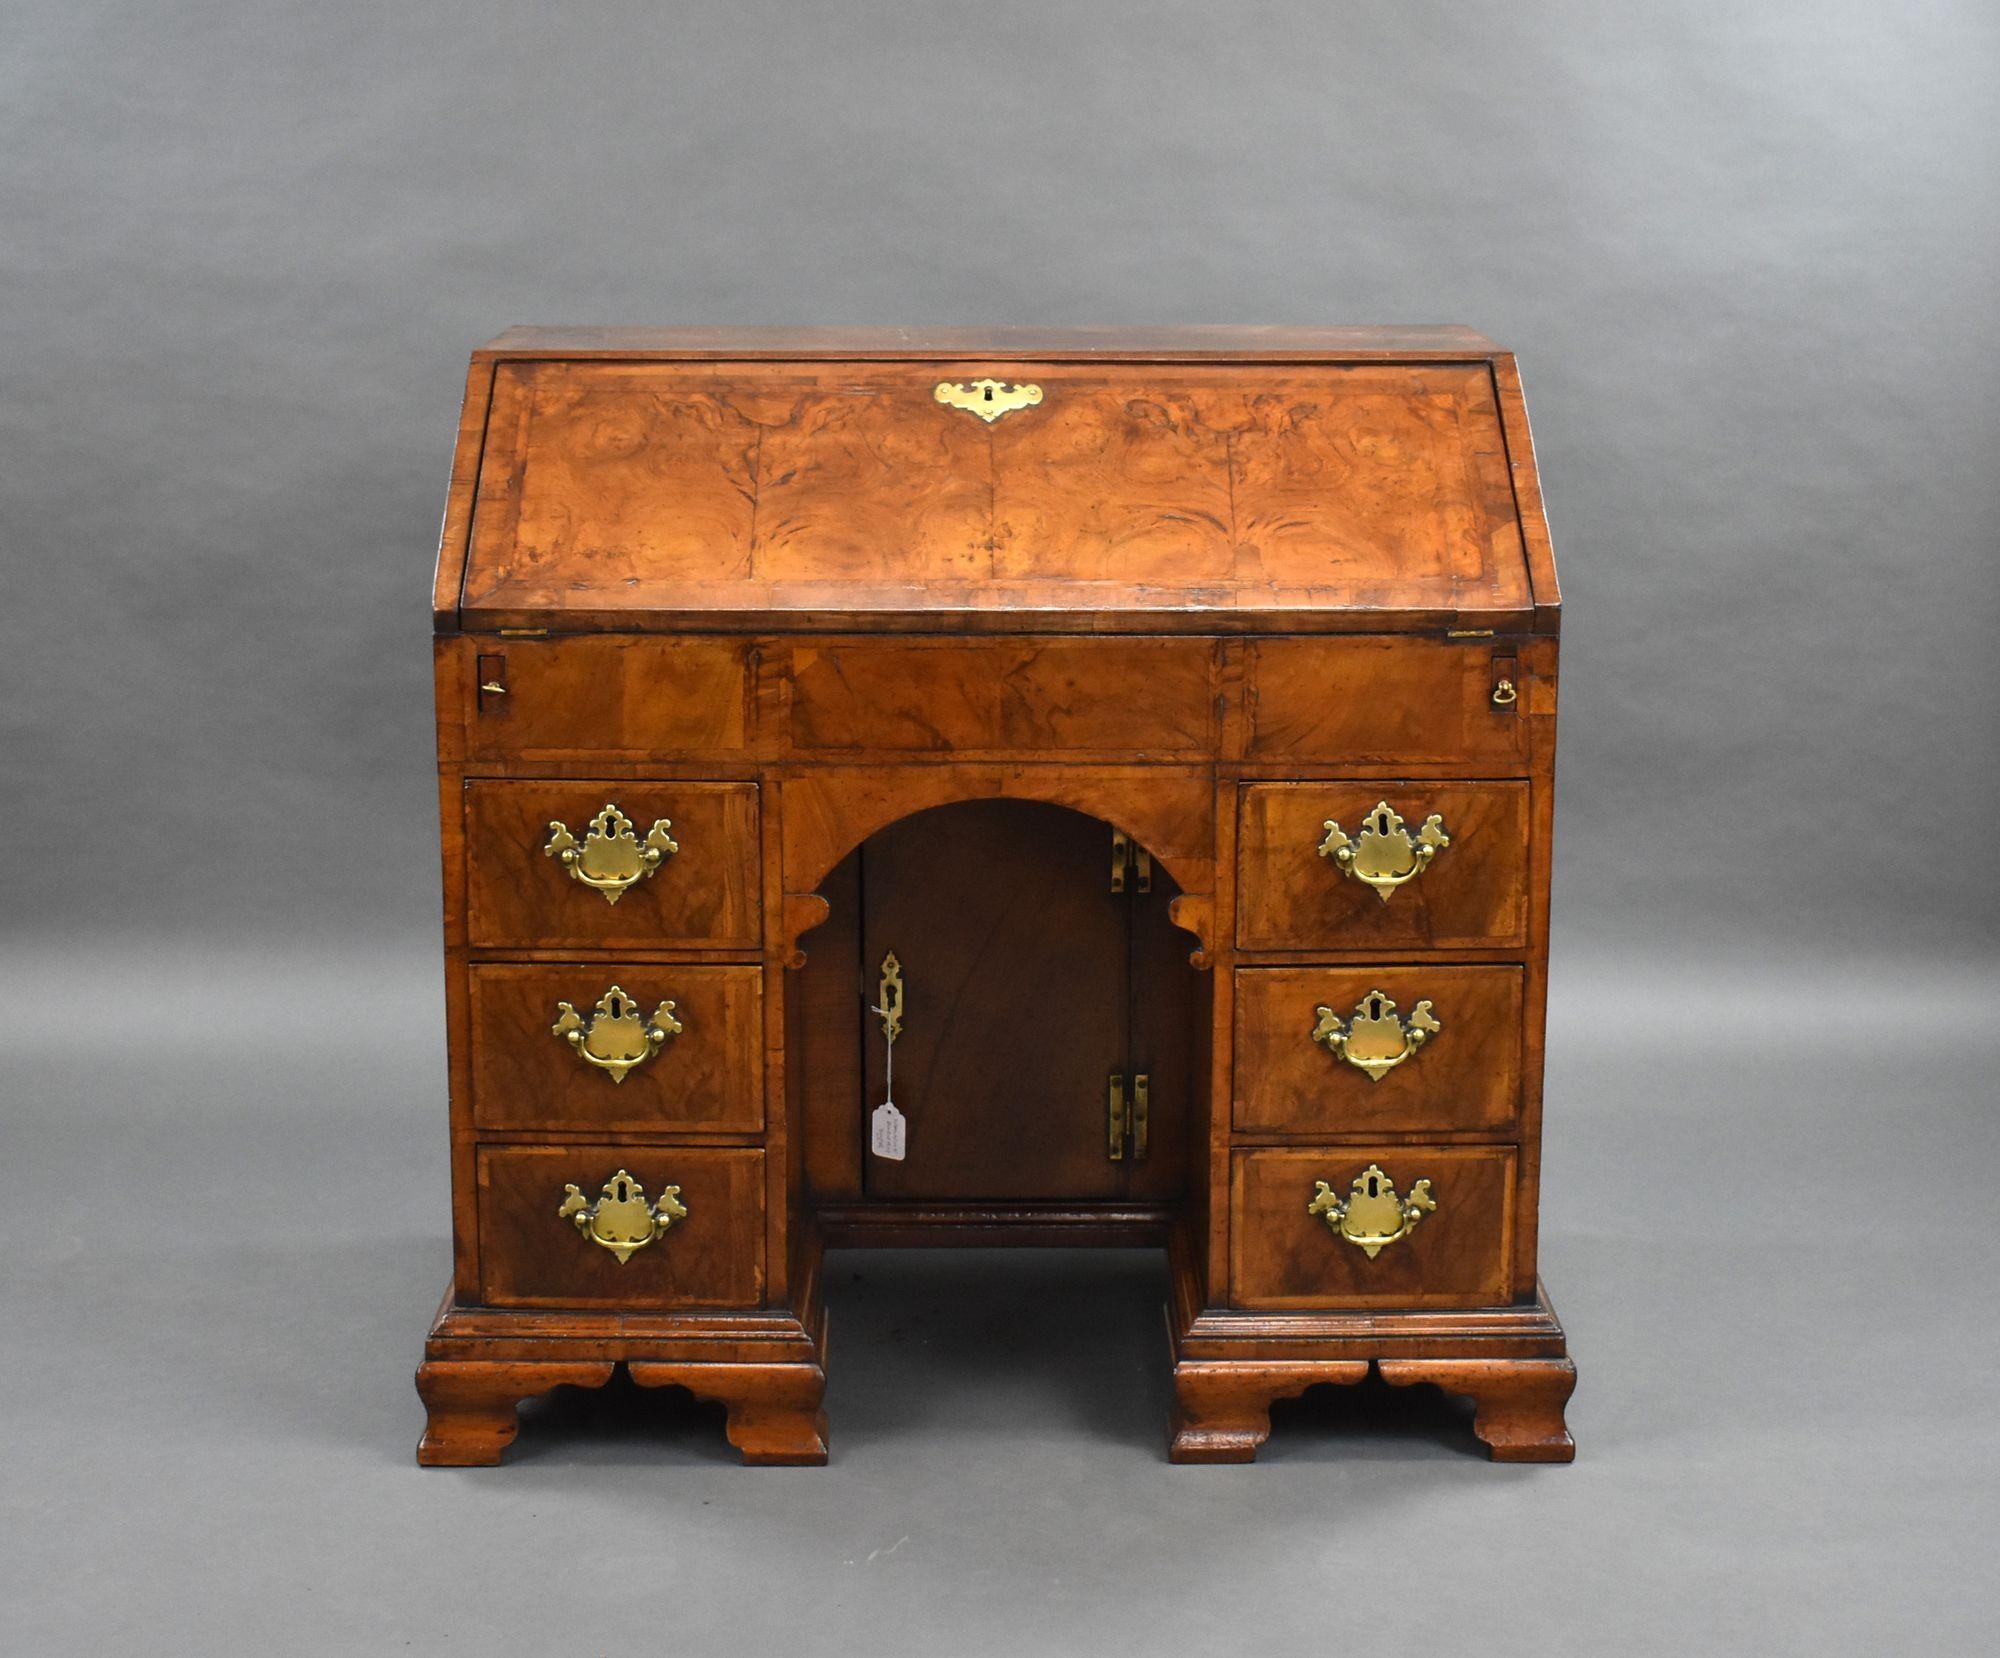 For sale is a good quality George II burr walnut bureau, cross and feather banded throughout, the fall opens to a fully fitted interior of drawers and pigeon holes, including four secret drawers, above a slide topped well and a gilt tooled green